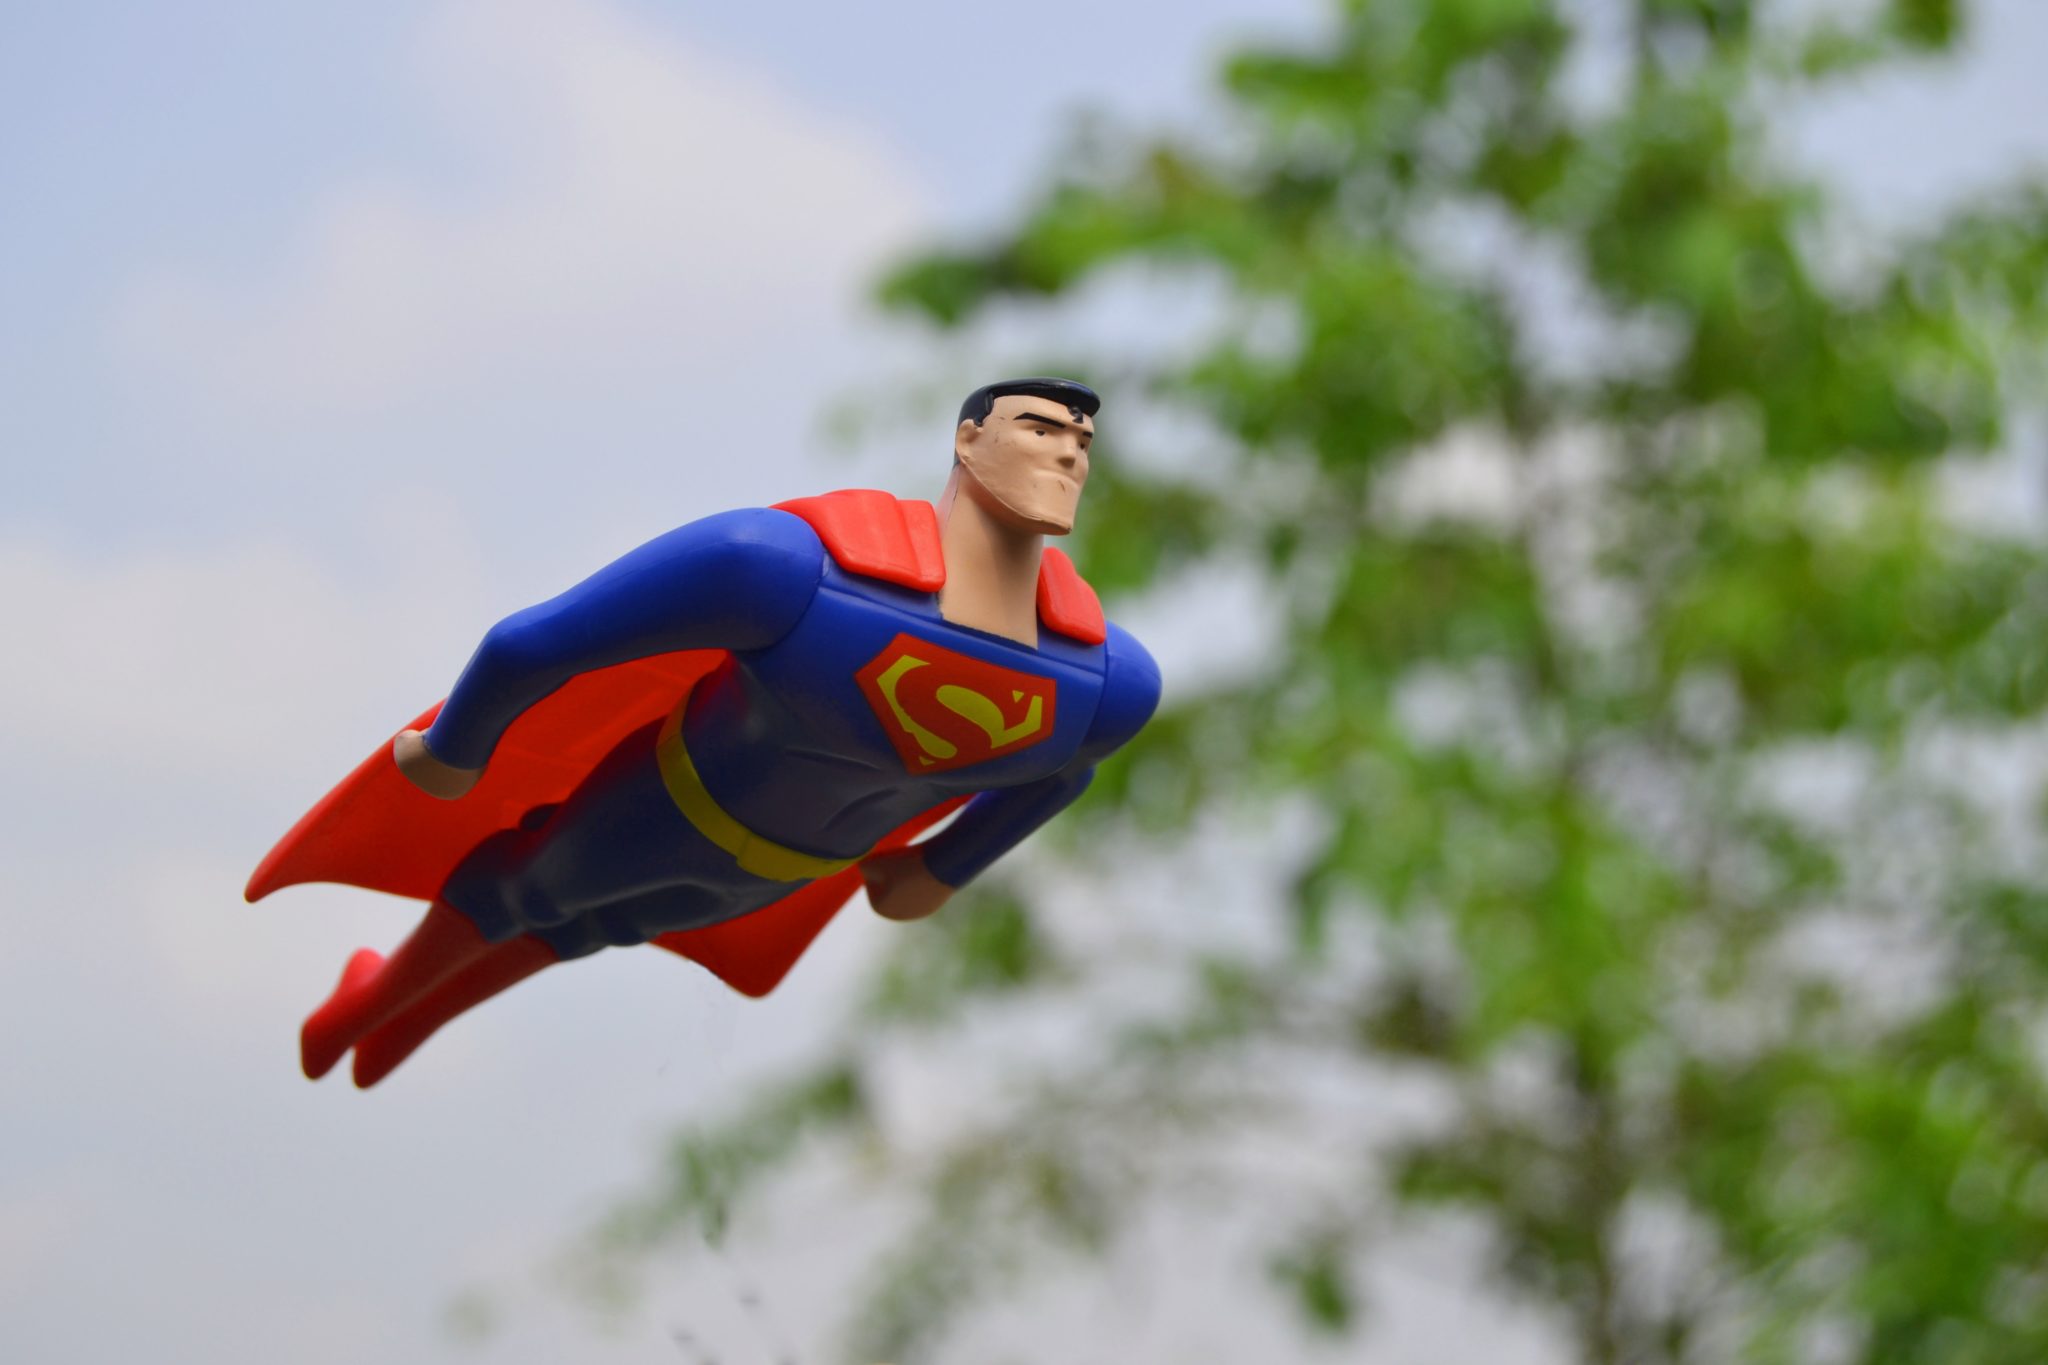 Superman Figure flying in front of green tree in blurry background